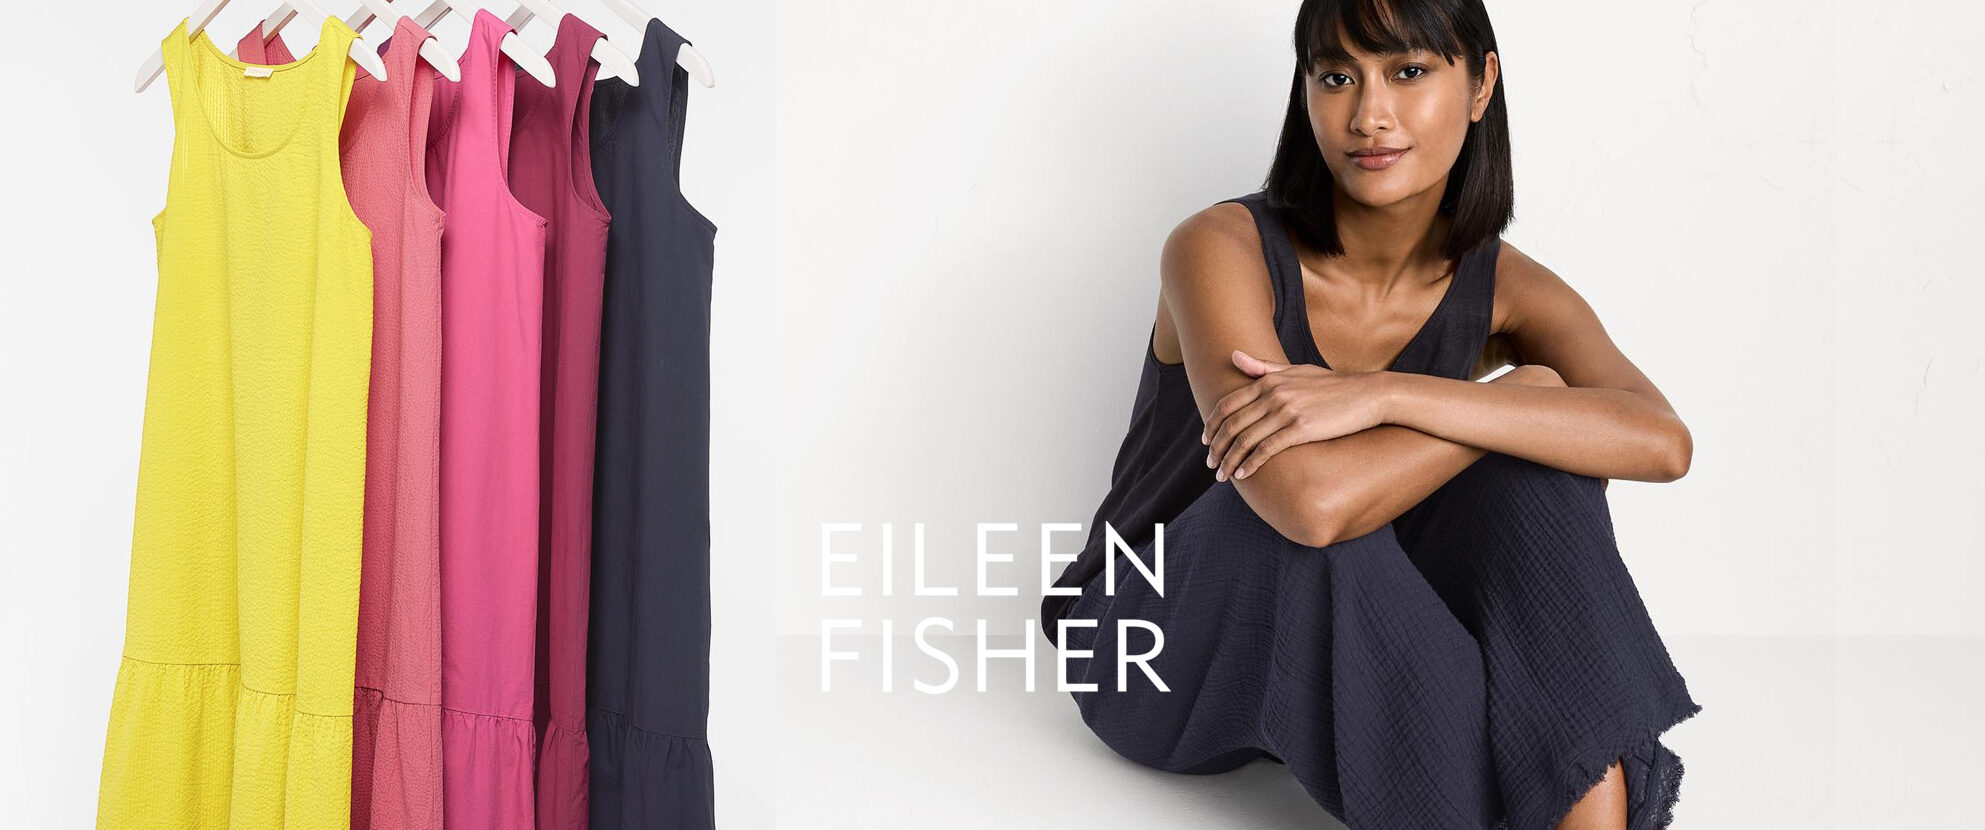 Dean's Clothing Featured Brand - Eileen Fisher dresses and female model.